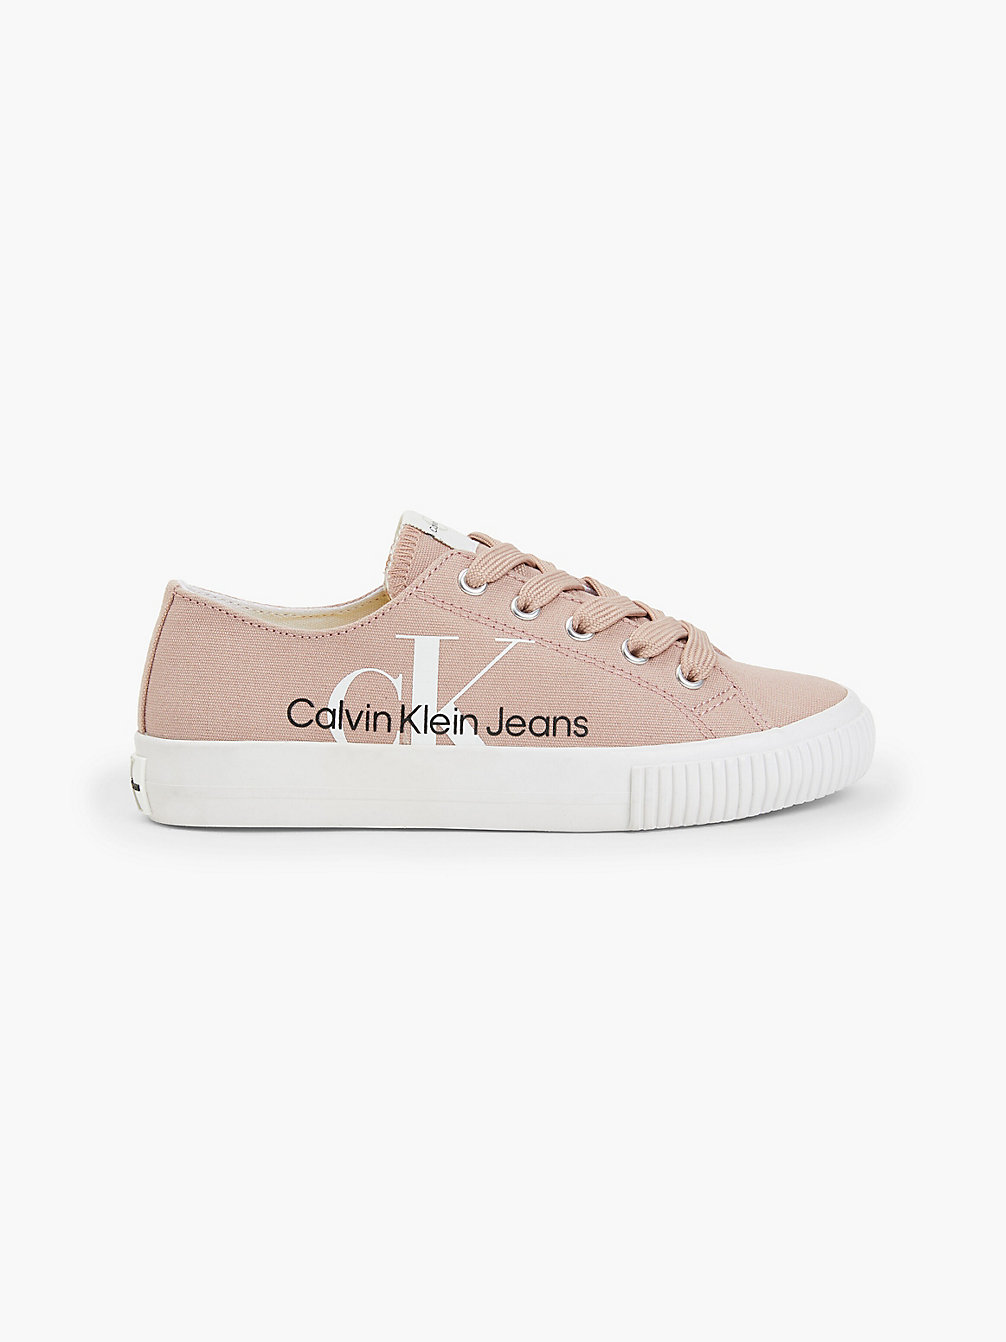 Sneakers In Tela Riciclata > ANTIQUE ROSE > undefined girls > Calvin Klein